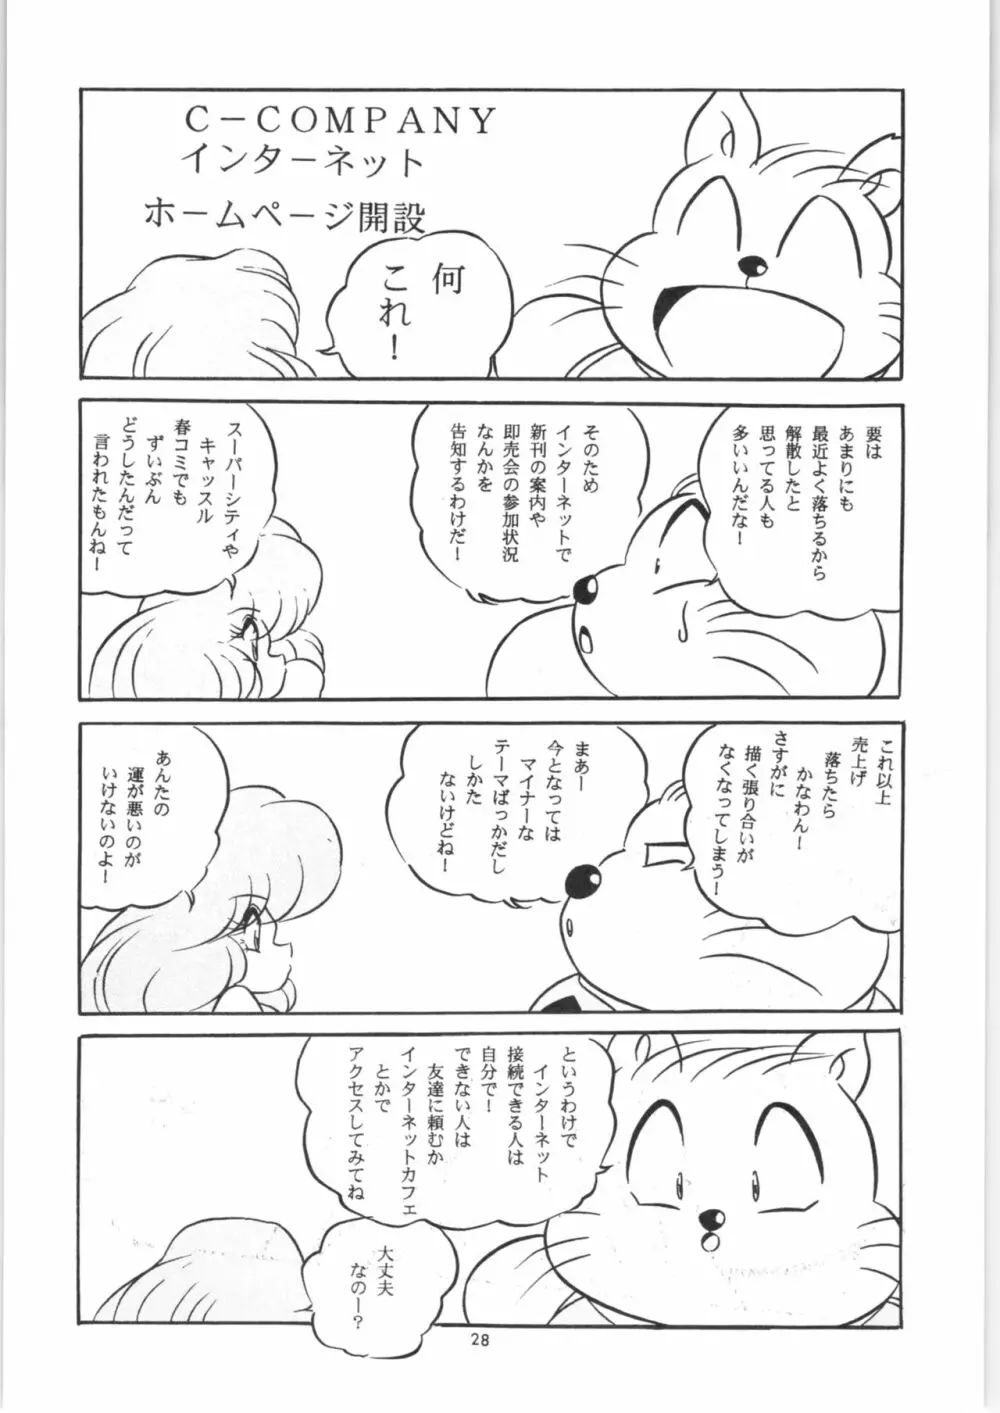 C-COMPANY SPECIAL STAGE 18 Page.29